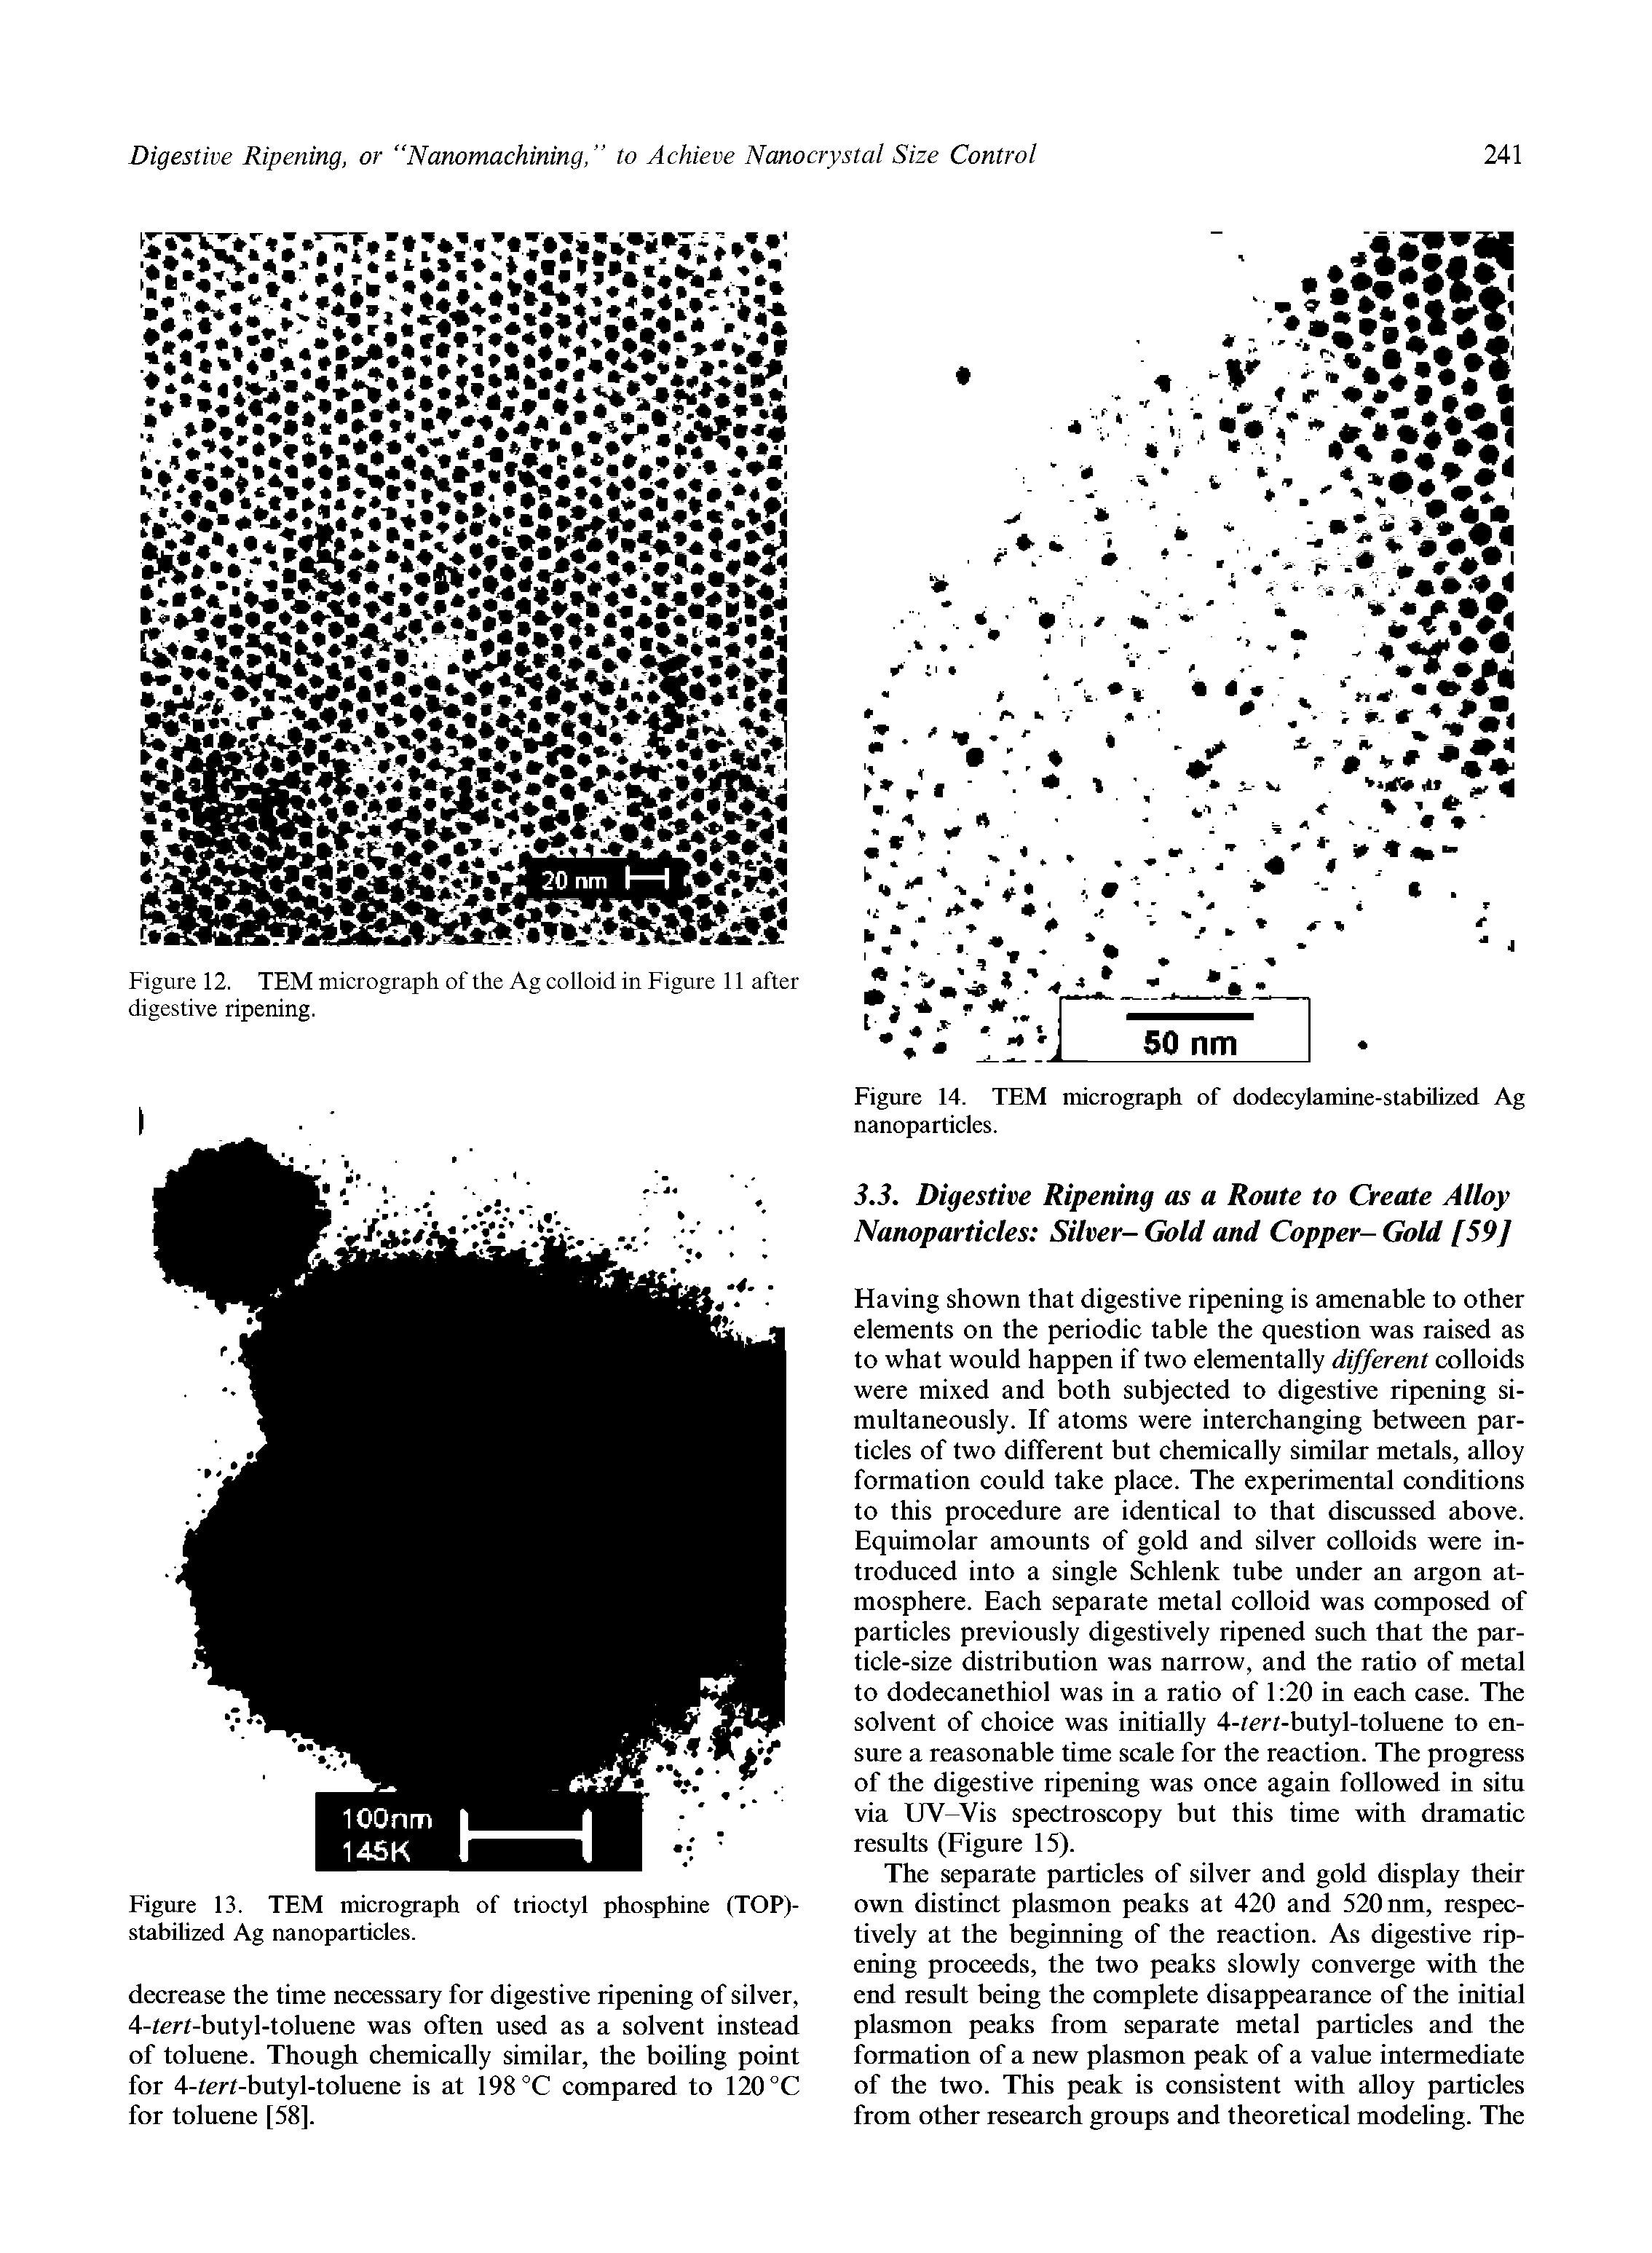 Figure 12. TEM micrograph of the Ag colloid in Figure 11 after digestive ripening.